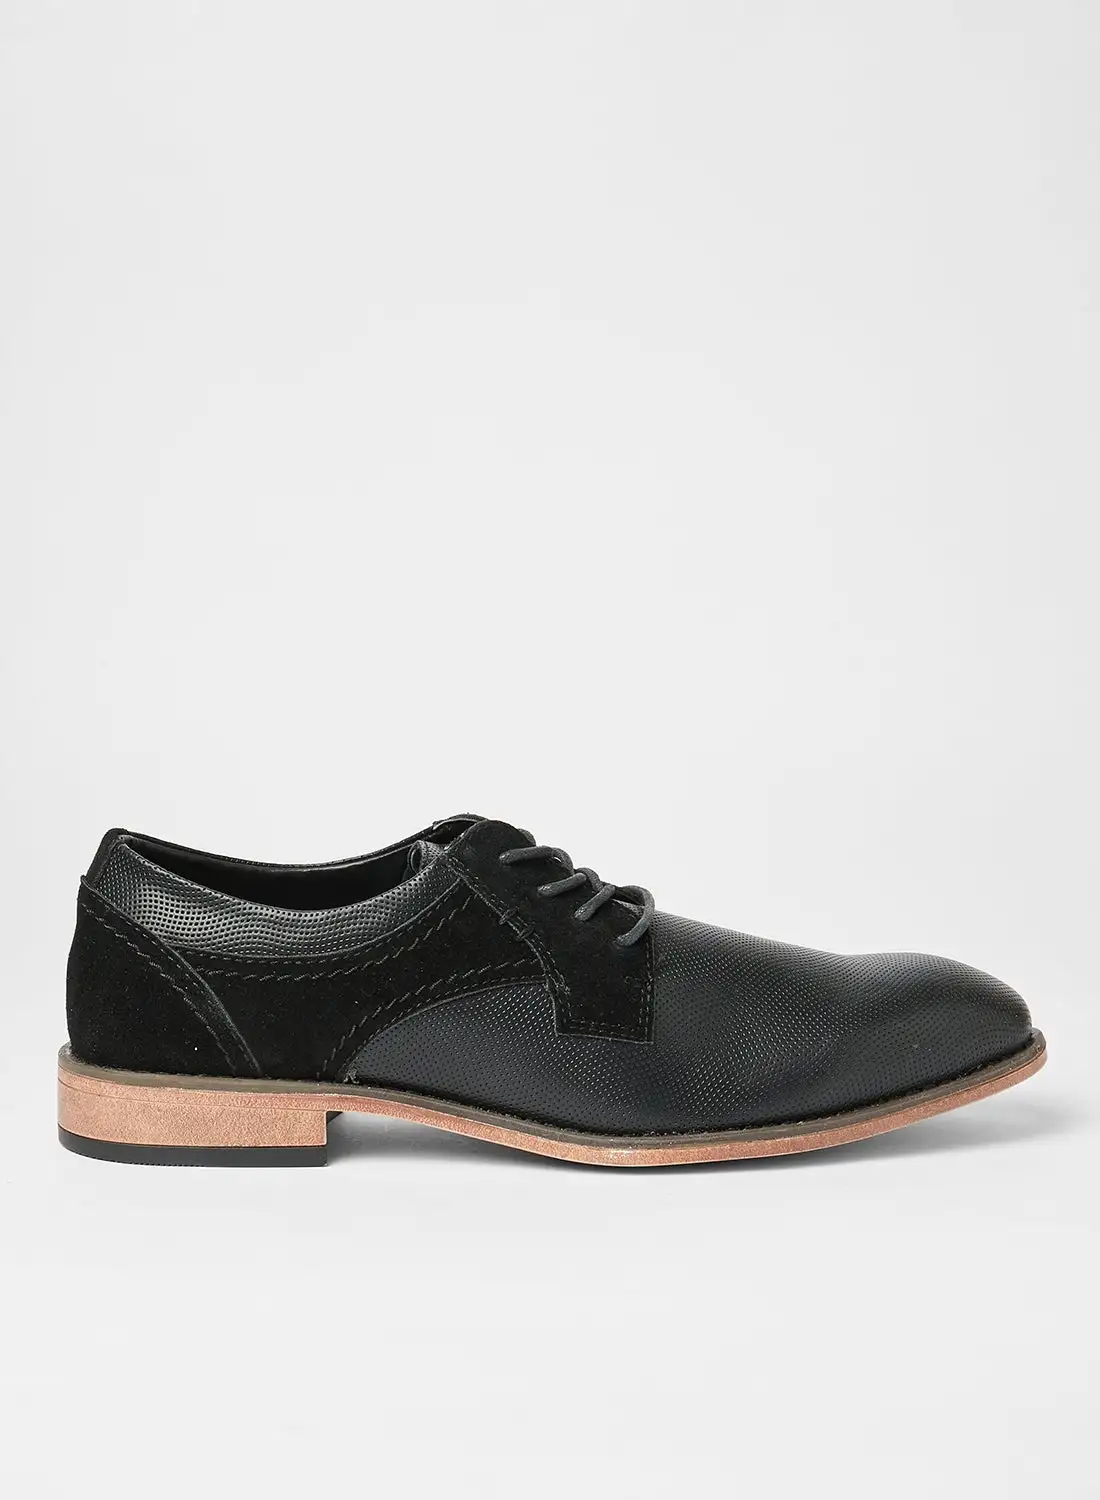 CALL IT SPRING Renne Oxford Lace Up Shoes Black